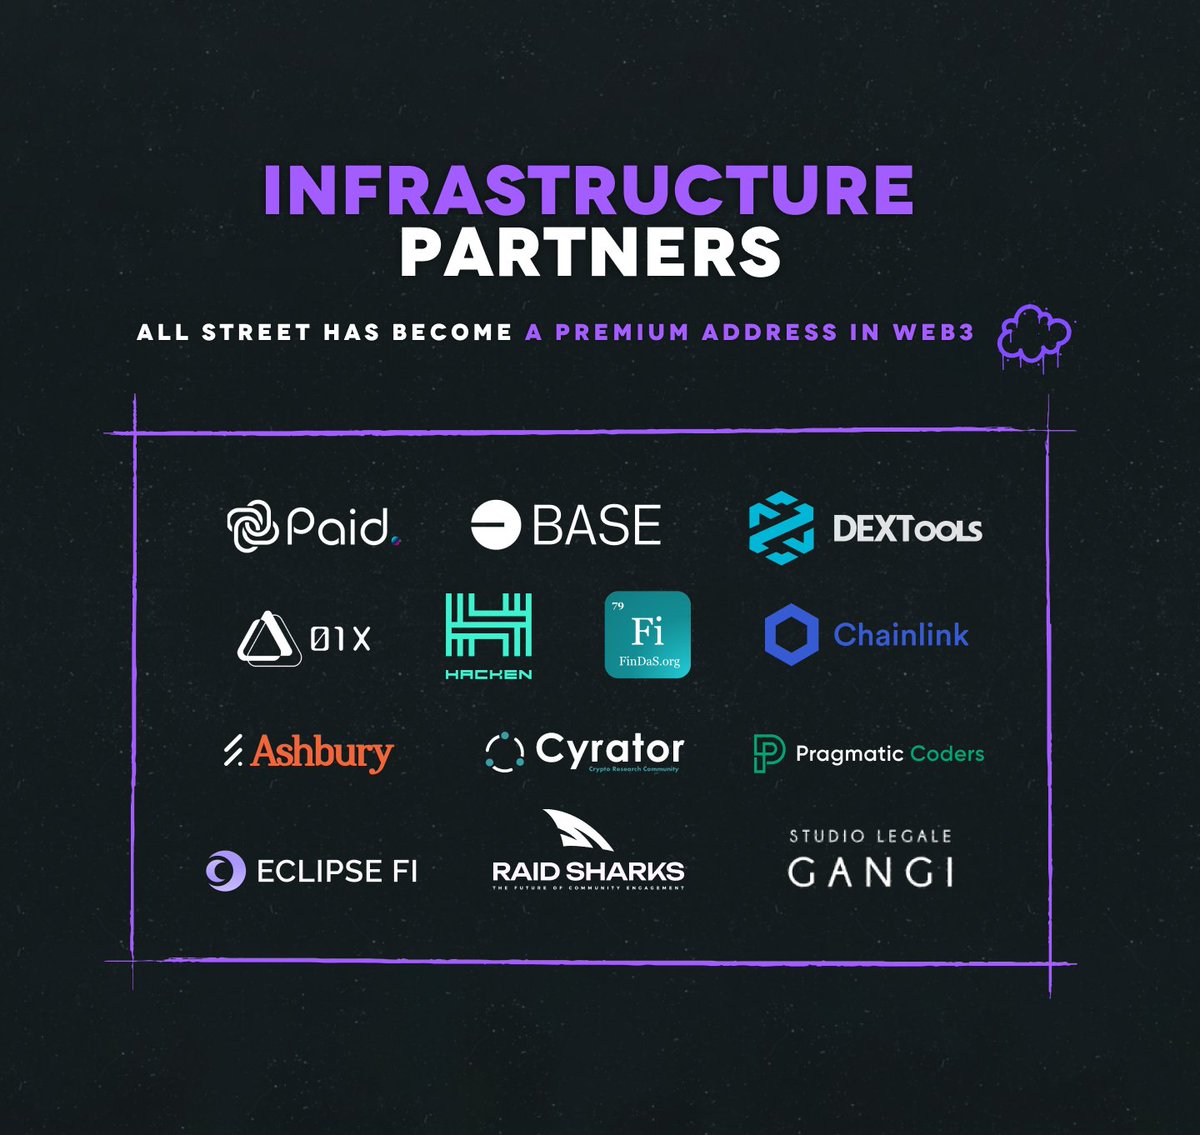 LATEST: INFRASTRUCTURE PARTNERS ANNOUNCEMENT! Common Wealth is excited to have so many amazing names on board as Infrastructure Partners BIG THINGS ARE COMING! @paid_network @base @DEXToolsApp @Eclipsefi @cyrator_app @RaidSharks @chainlink @pragmaticcoders @hackenclub